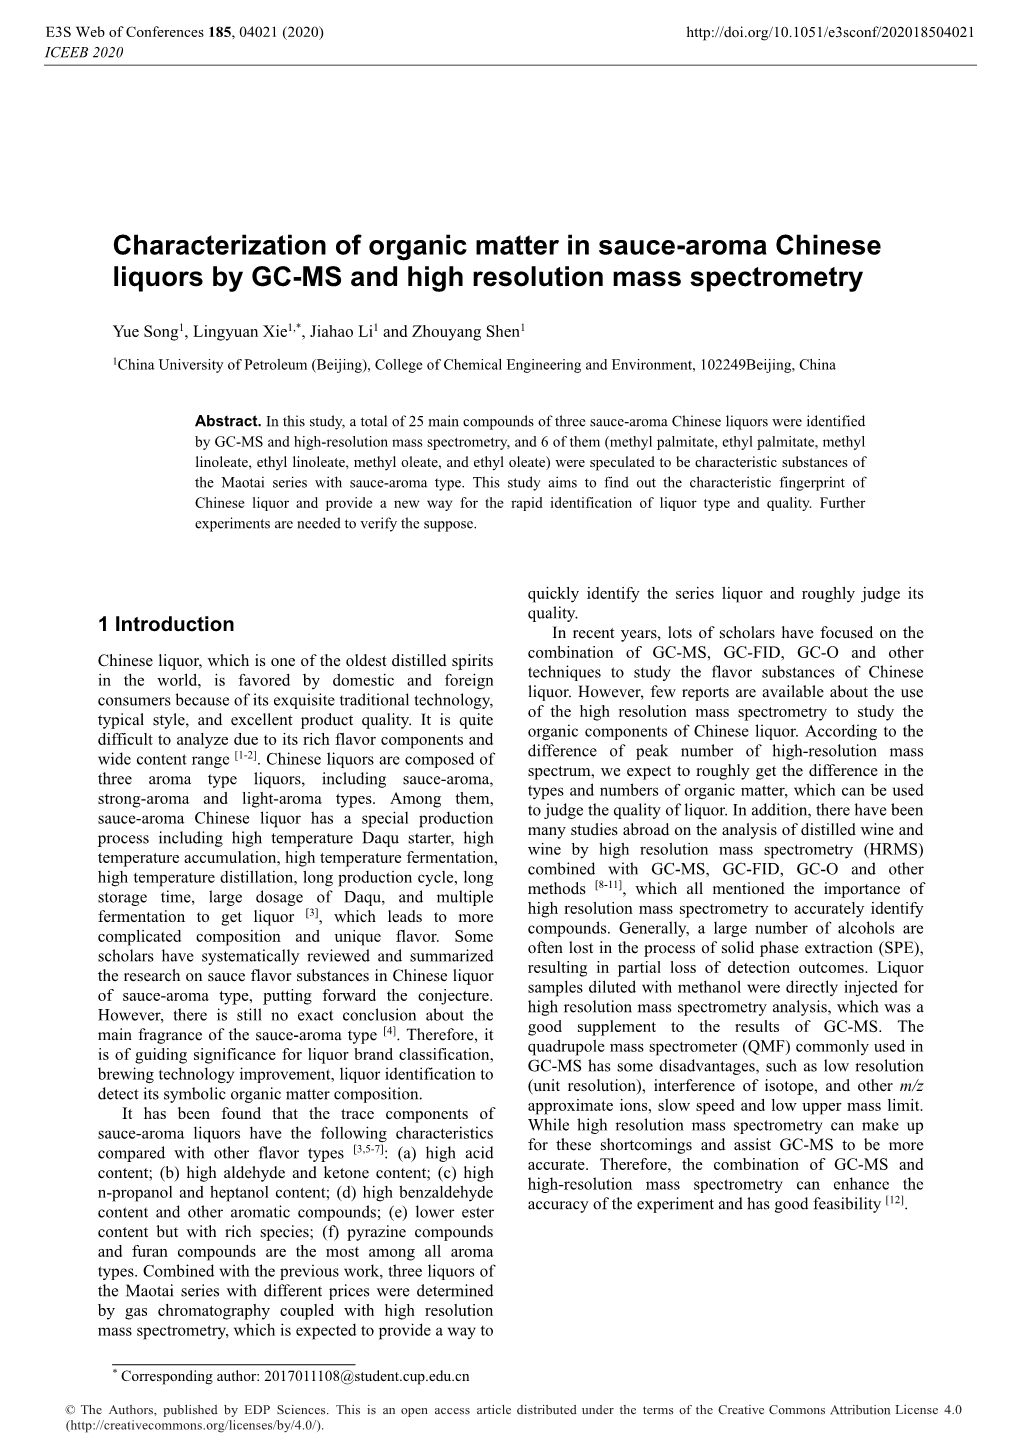 Characterization of Organic Matter in Sauce-Aroma Chinese Liquors by GC-MS and High Resolution Mass Spectrometry